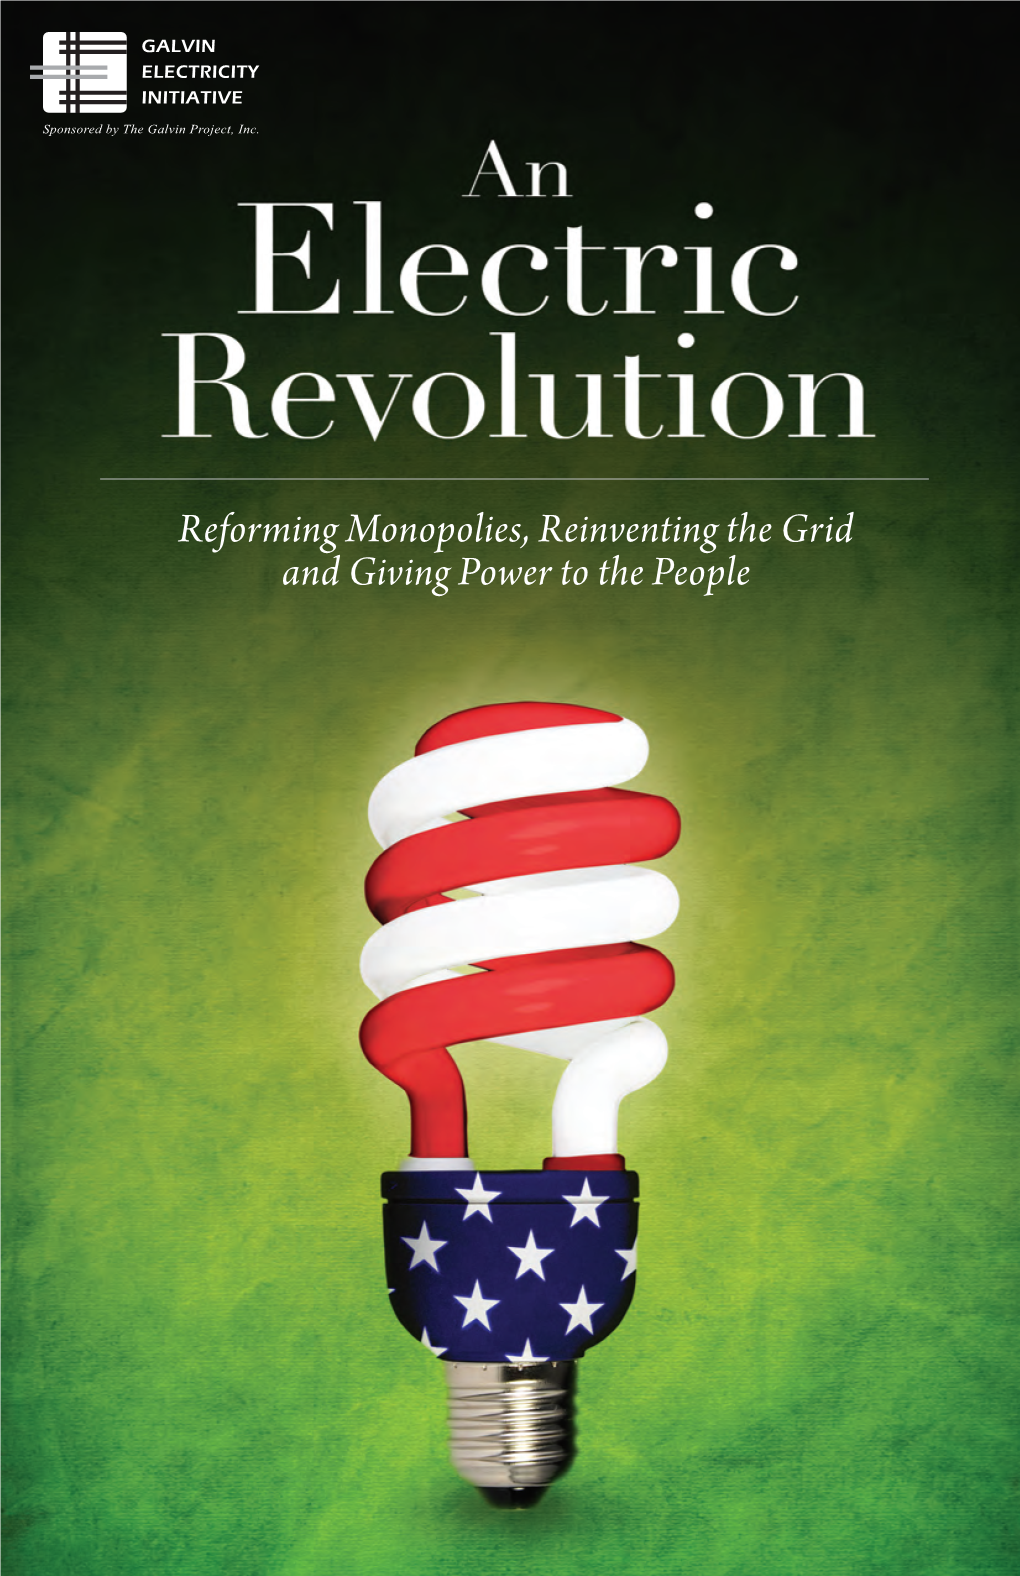 Reforming Monopolies, Reinventing the Grid and Giving Power to The